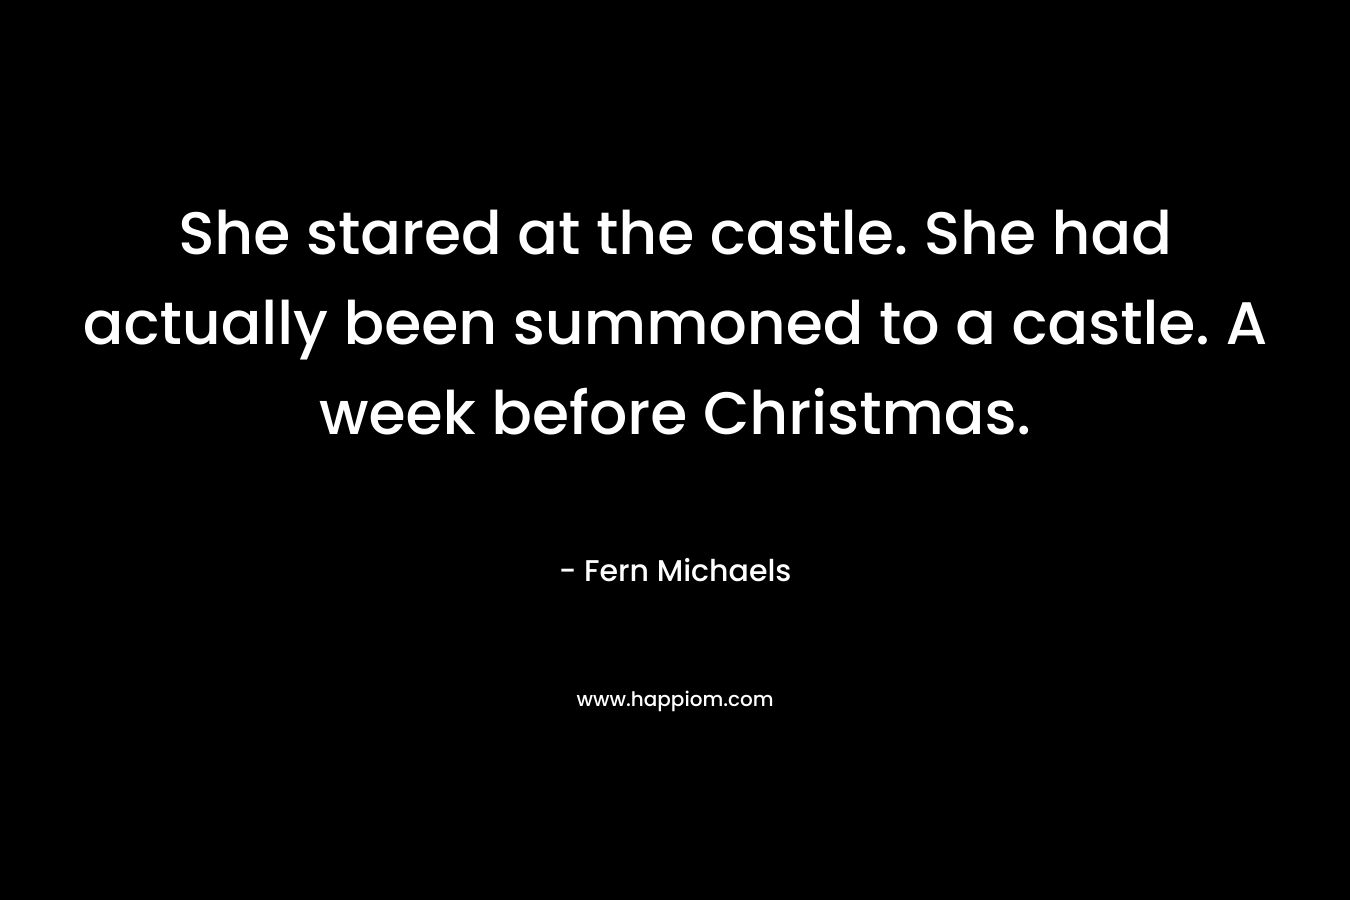 She stared at the castle. She had actually been summoned to a castle. A week before Christmas. – Fern Michaels